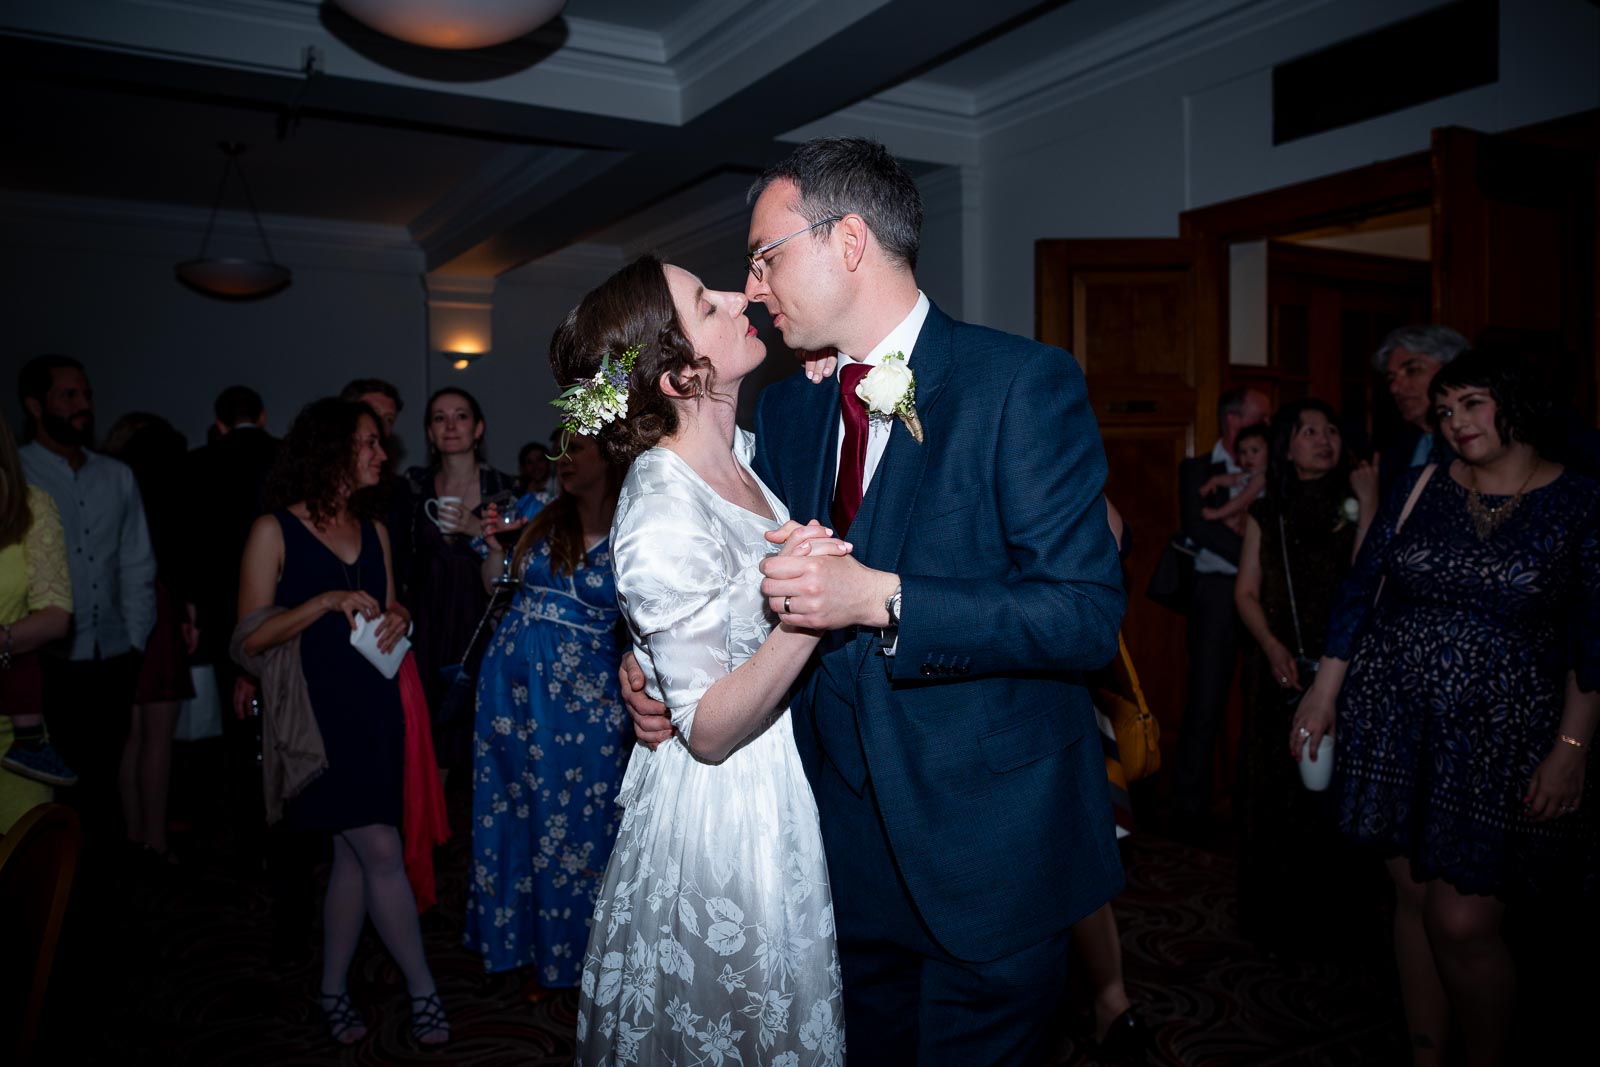 Alexis and Niell enjoy their first dance in Pelham House Hotel, Lewes.